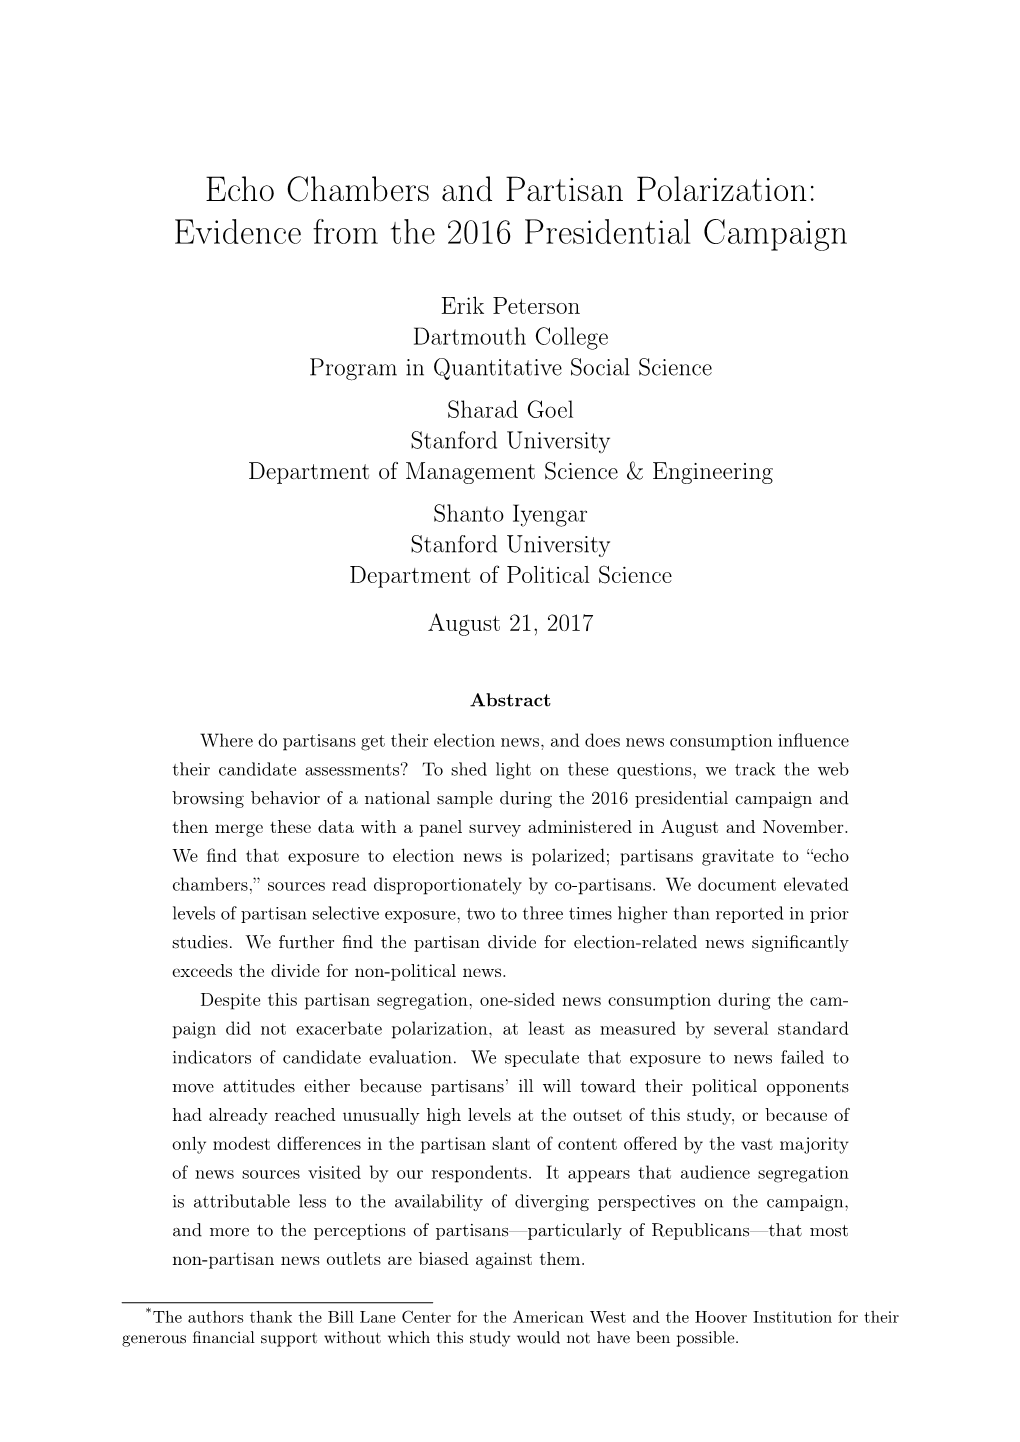 Echo Chambers and Partisan Polarization: Evidence from the 2016 Presidential Campaign